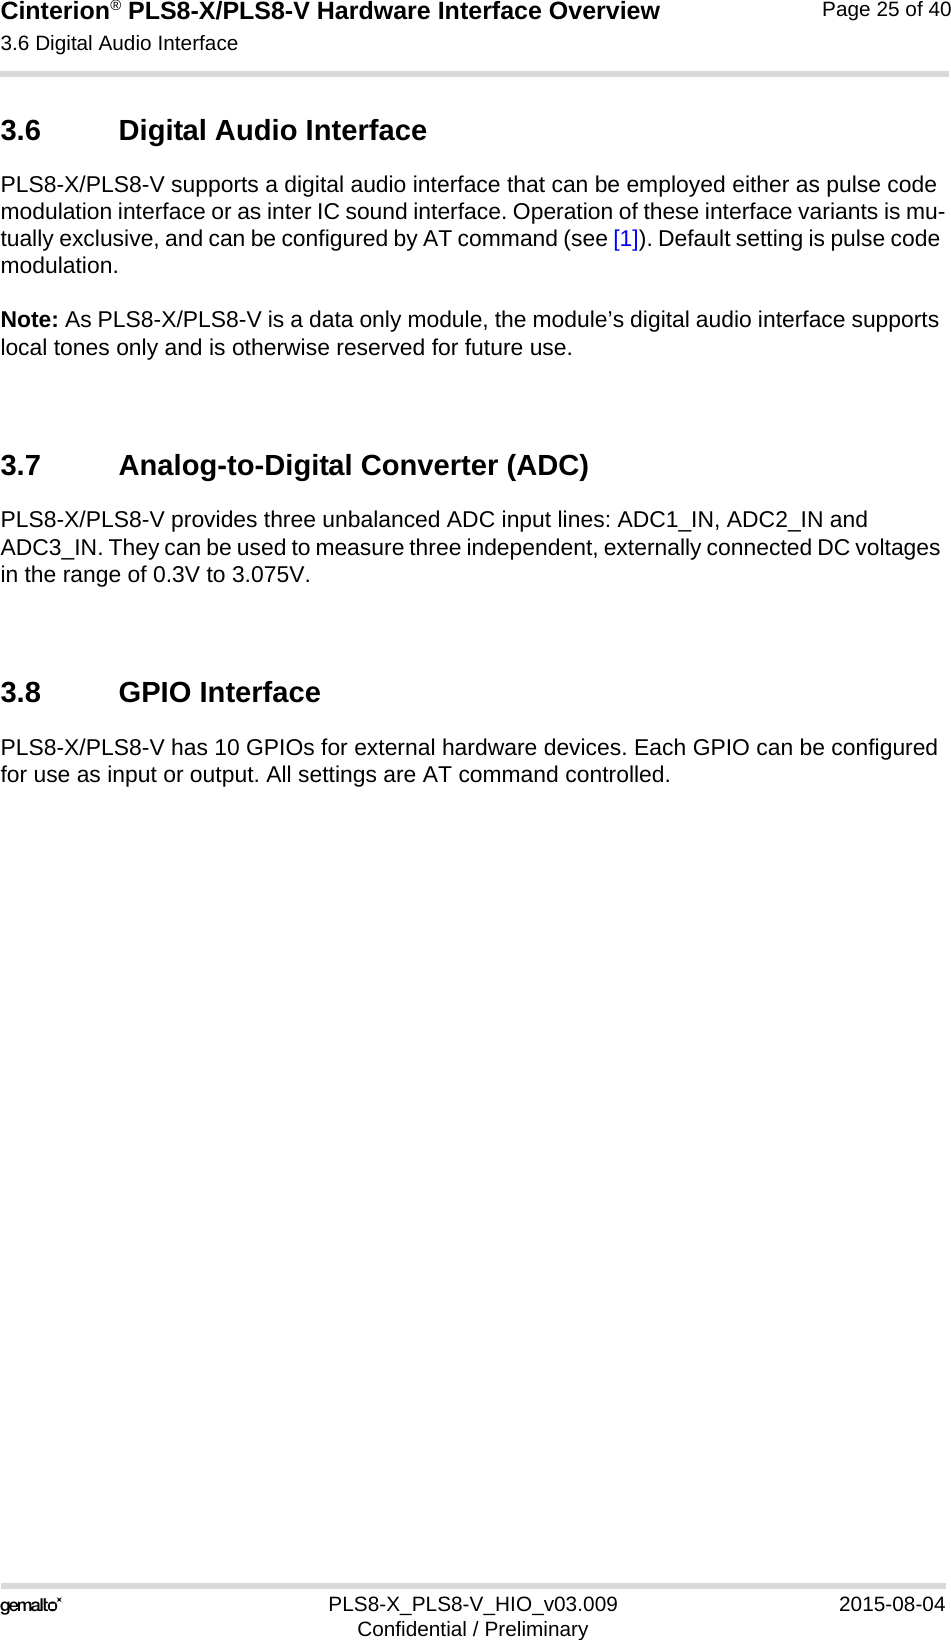 Cinterion® PLS8-X/PLS8-V Hardware Interface Overview3.6 Digital Audio Interface26PLS8-X_PLS8-V_HIO_v03.009 2015-08-04Confidential / PreliminaryPage 25 of 403.6 Digital Audio InterfacePLS8-X/PLS8-V supports a digital audio interface that can be employed either as pulse code modulation interface or as inter IC sound interface. Operation of these interface variants is mu-tually exclusive, and can be configured by AT command (see [1]). Default setting is pulse code modulation.Note: As PLS8-X/PLS8-V is a data only module, the module’s digital audio interface supports local tones only and is otherwise reserved for future use.3.7 Analog-to-Digital Converter (ADC)PLS8-X/PLS8-V provides three unbalanced ADC input lines: ADC1_IN, ADC2_IN and ADC3_IN. They can be used to measure three independent, externally connected DC voltages in the range of 0.3V to 3.075V.  3.8 GPIO InterfacePLS8-X/PLS8-V has 10 GPIOs for external hardware devices. Each GPIO can be configured for use as input or output. All settings are AT command controlled. 